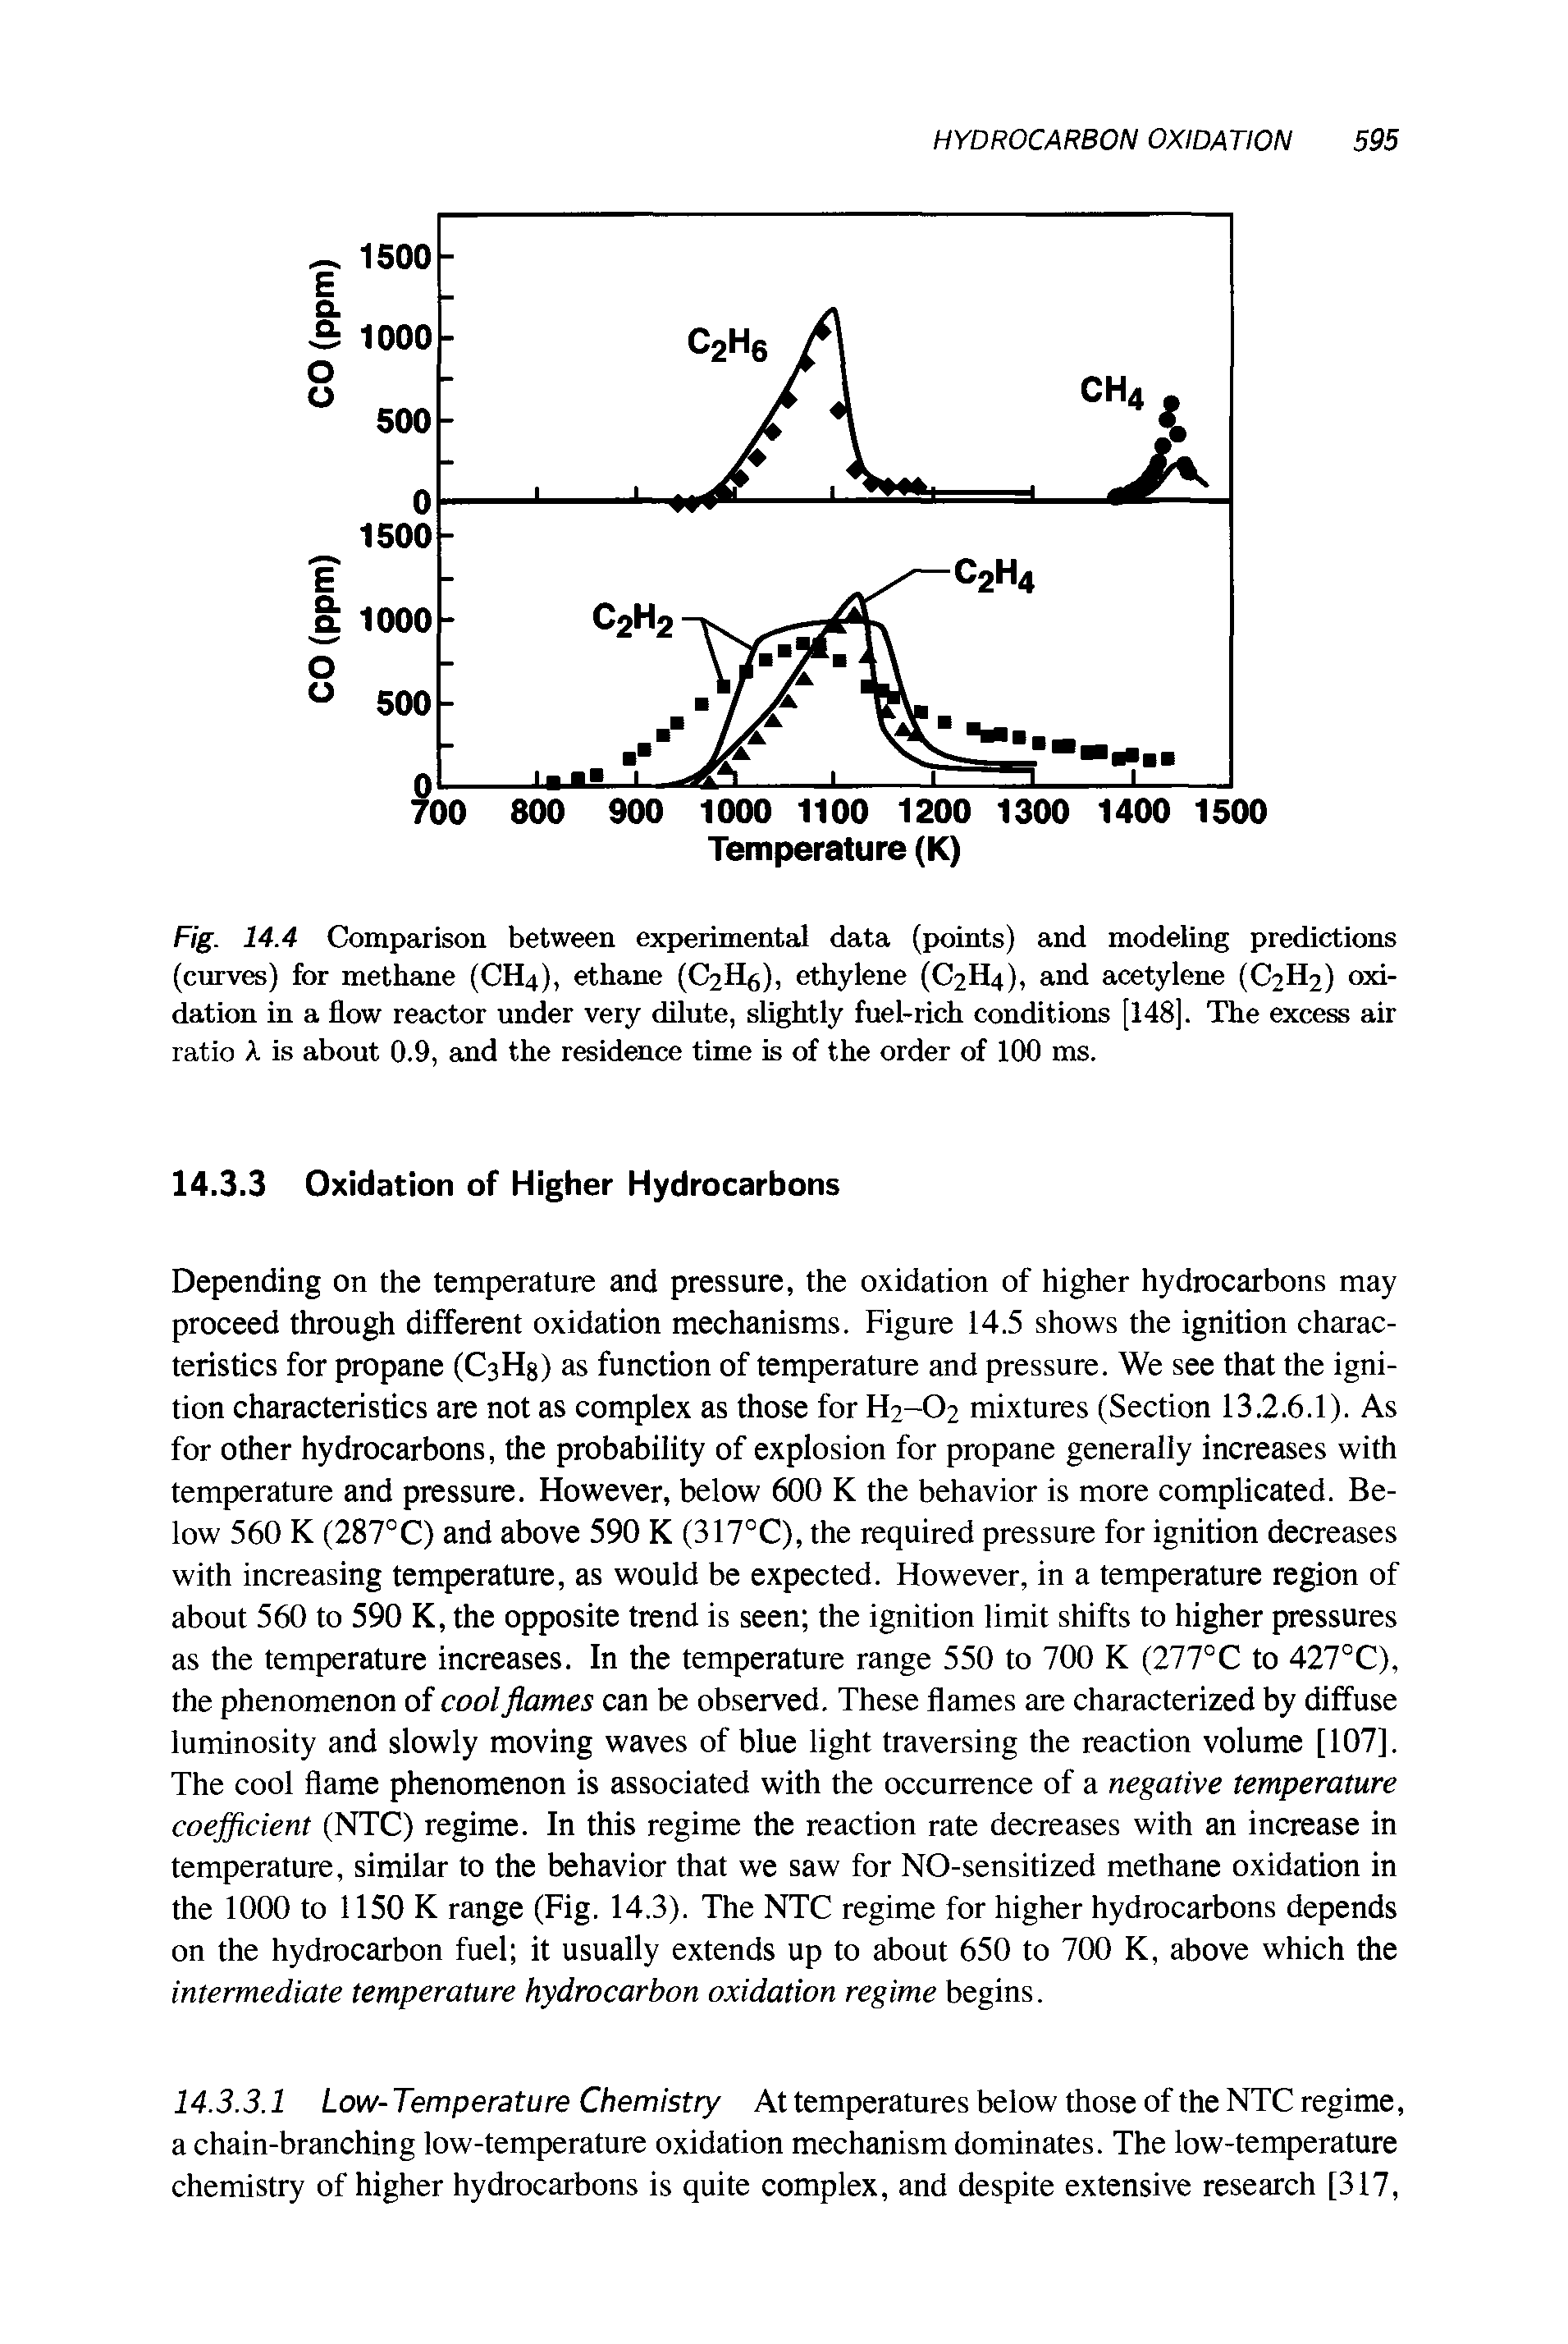 Fig. 14.4 Comparison between experimented data (points) and modeling predictions (curves) for methane (CH4), ethane (C2H6), ethylene (C2H4), and acetylene (C2H2) oxidation in a flow reactor under very dilute, slightly fuel-rich conditions [148]. The excess air ratio X is about 0.9, and the residence time is of the order of 100 ms.